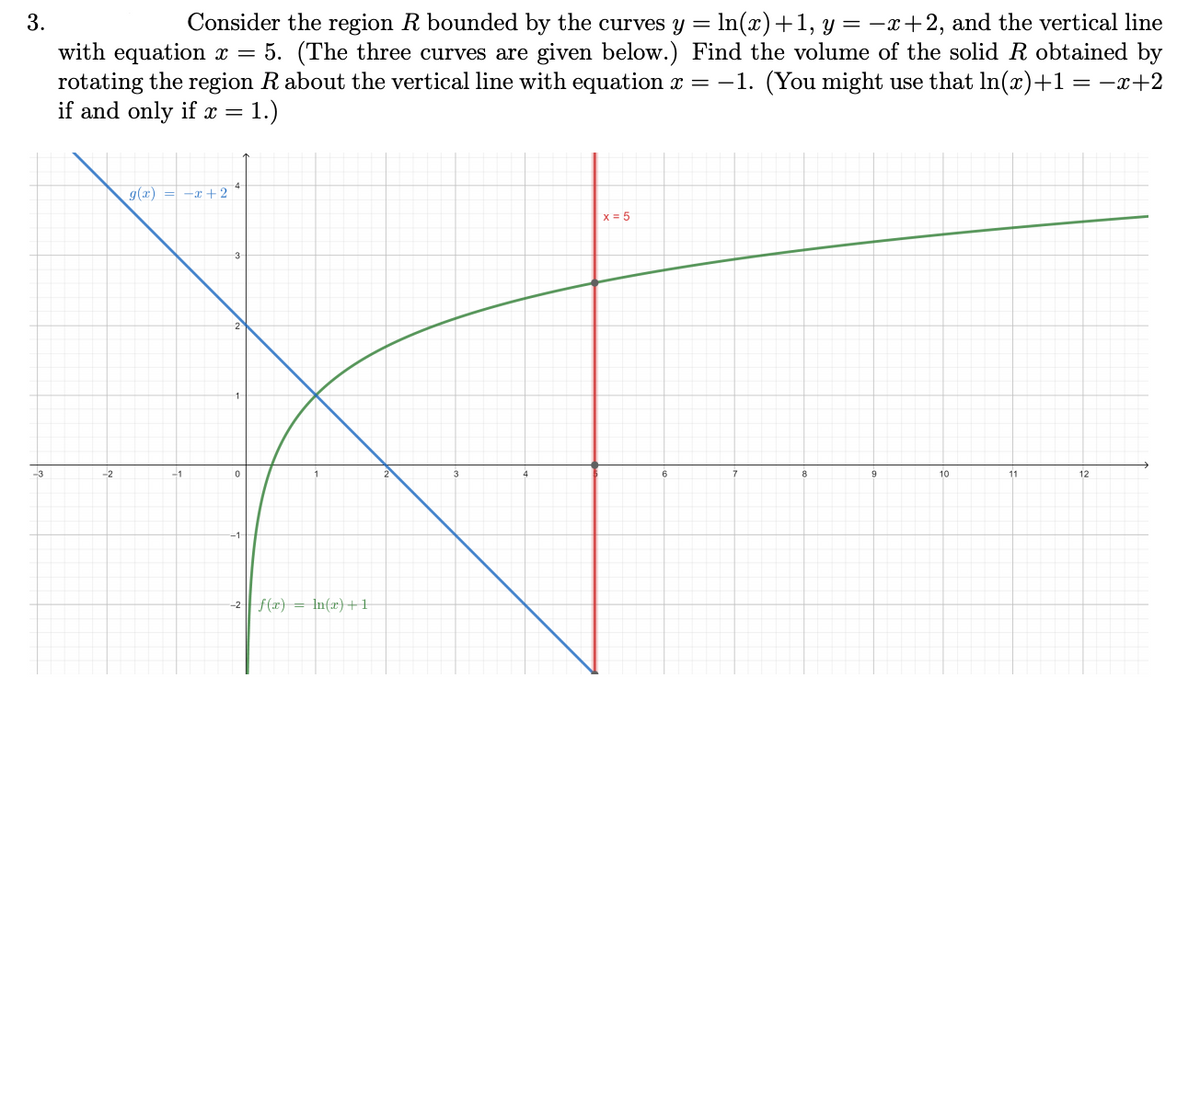 3.
Consider the region R bounded by the curves y = In(x)+1, y = -x+2, and the vertical line
with equation x = 5. (The three curves are given below.) Find the volume of the solid R obtained by
rotating the region R about the vertical line with equation x = -1. (You might use that In(x)+1= -x+2
if and only if x =
= 1.)
g(æ) = -x+2
x = 5
-2
-1
8
10
11
12
-2 f(x) = In(x}+1
